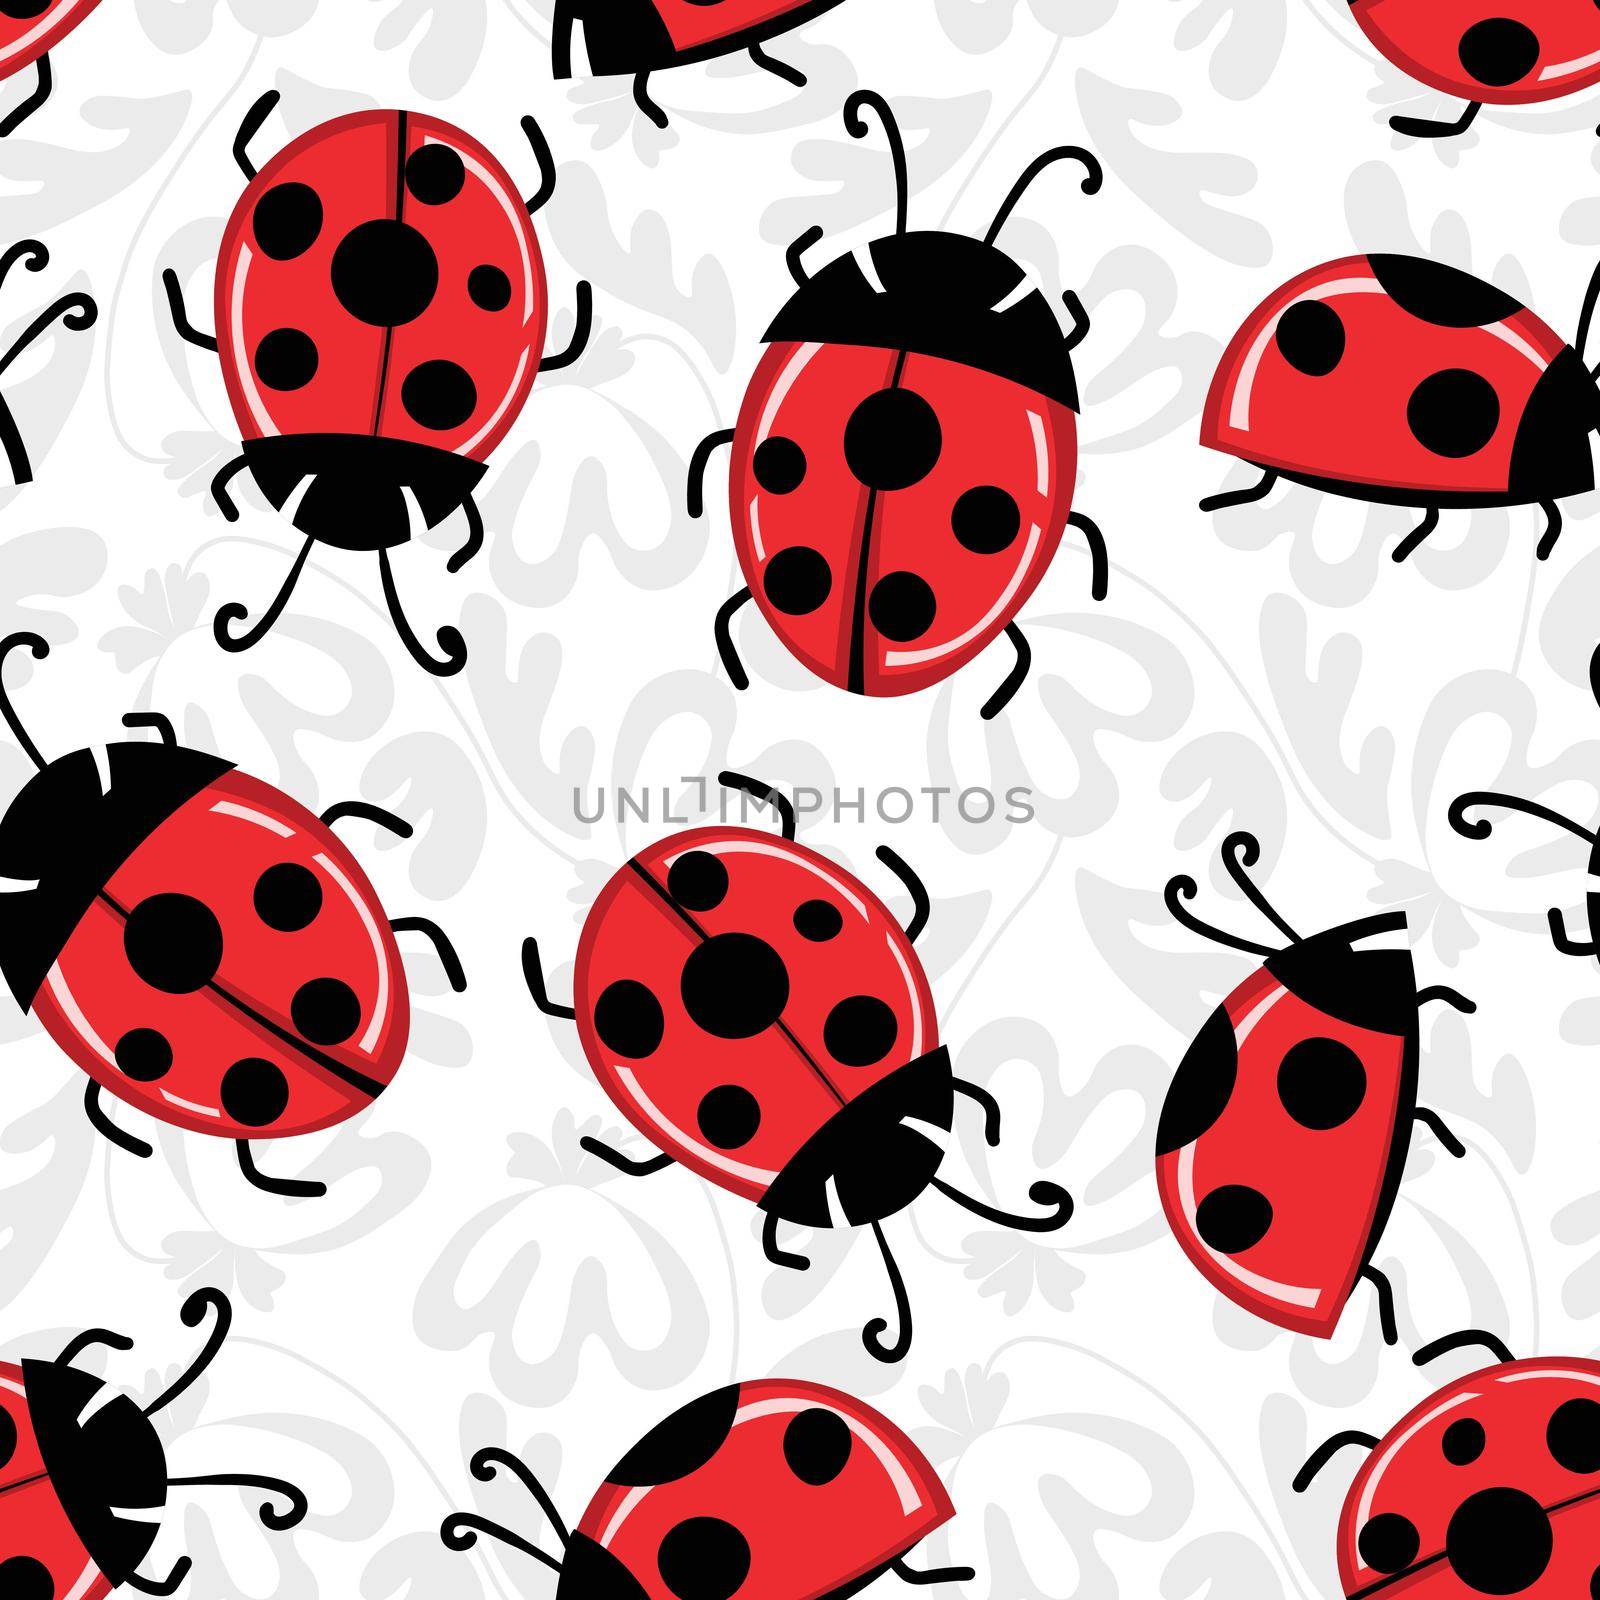 Fashion animal seamless pattern with colorful ladybird on white background. Cute holiday illustration with ladybags for baby. Design for invitation, poster, card, fabric, textile by allaku